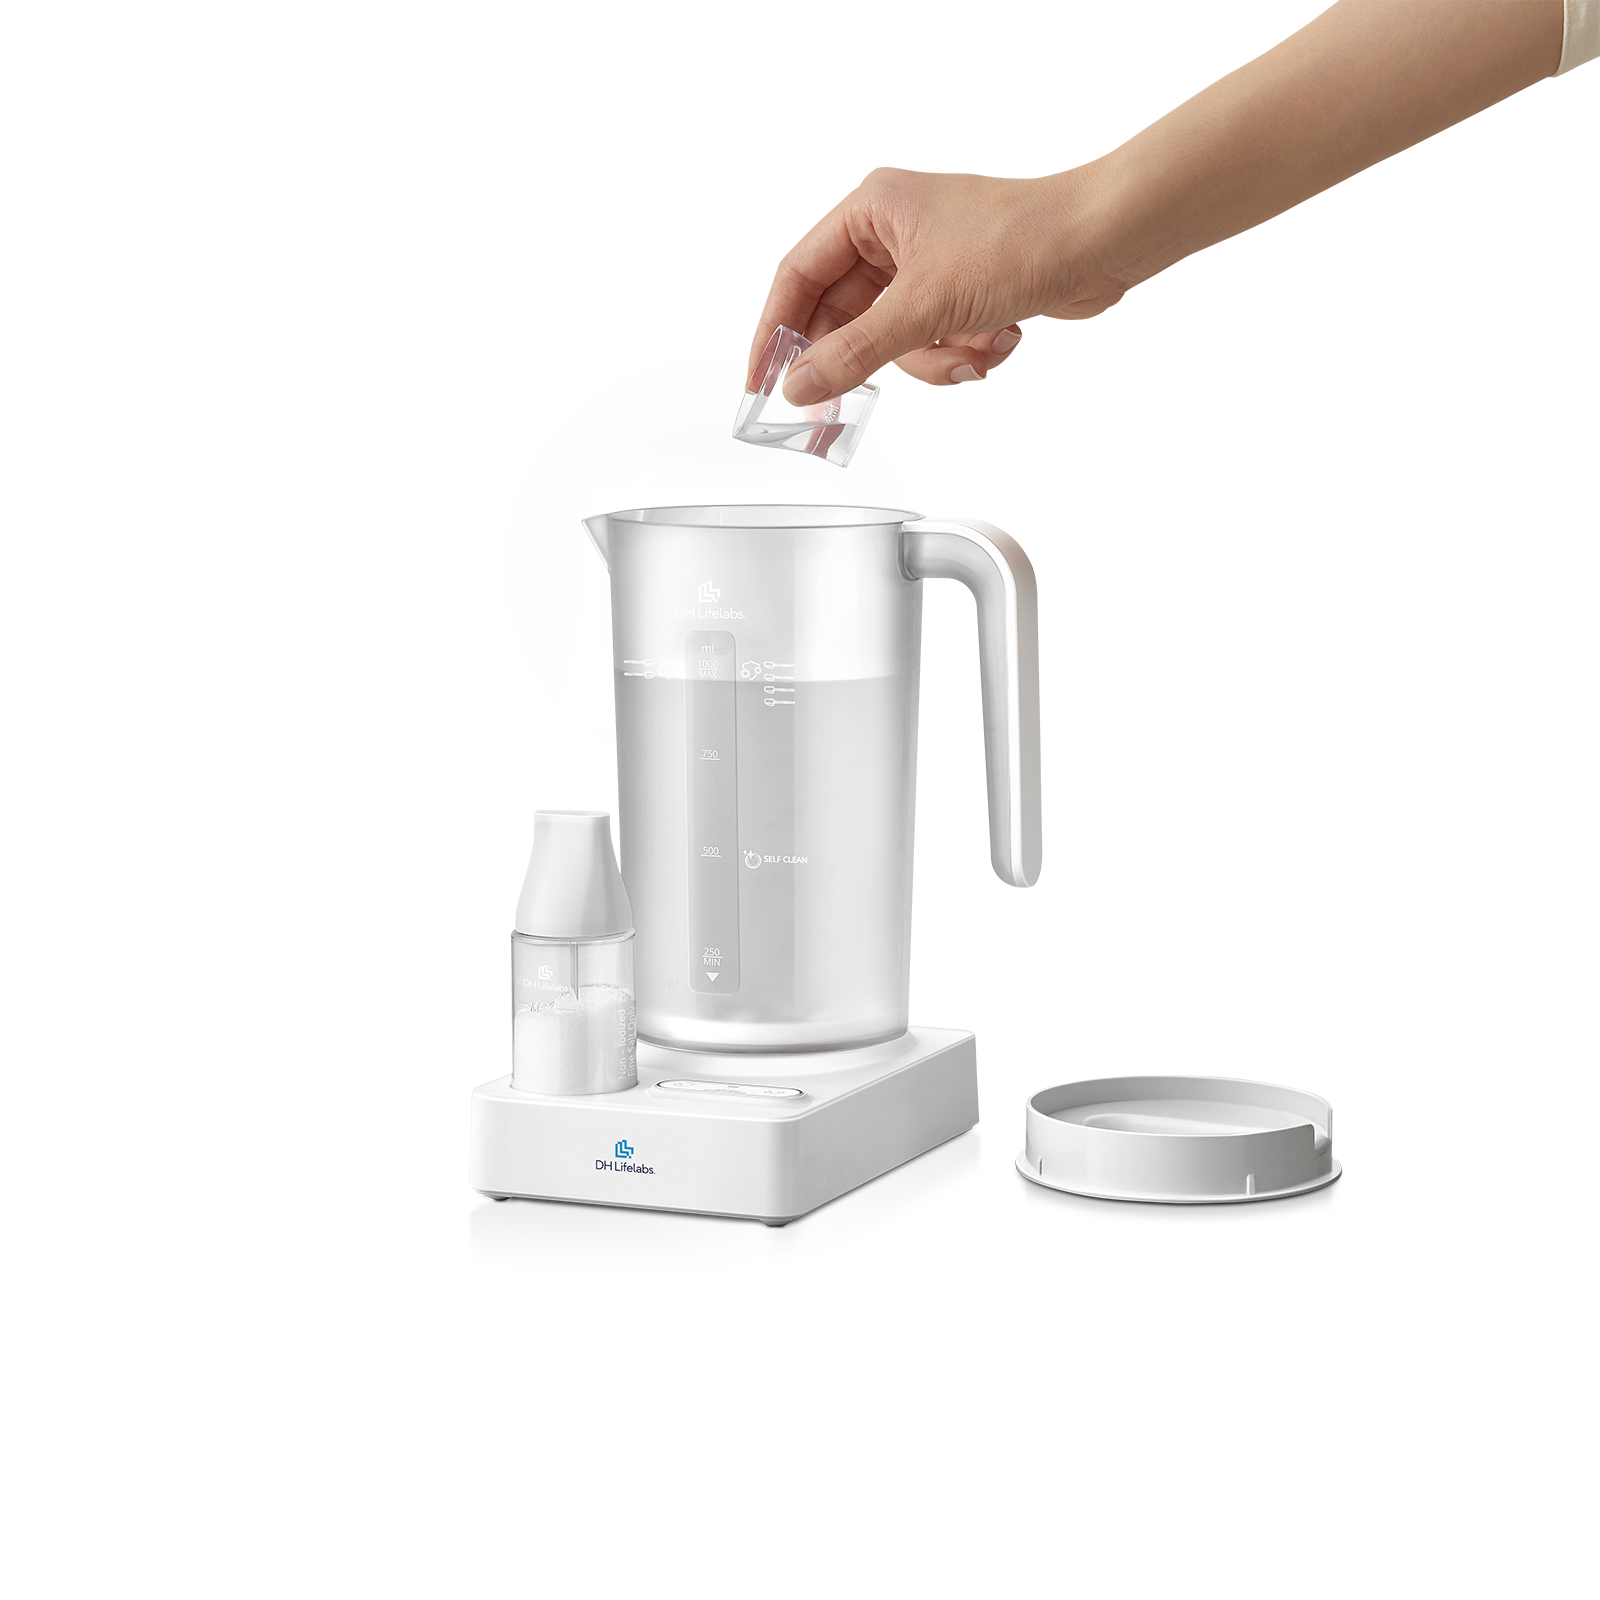 Aaira Surface Multi-Purpose Cleaning System